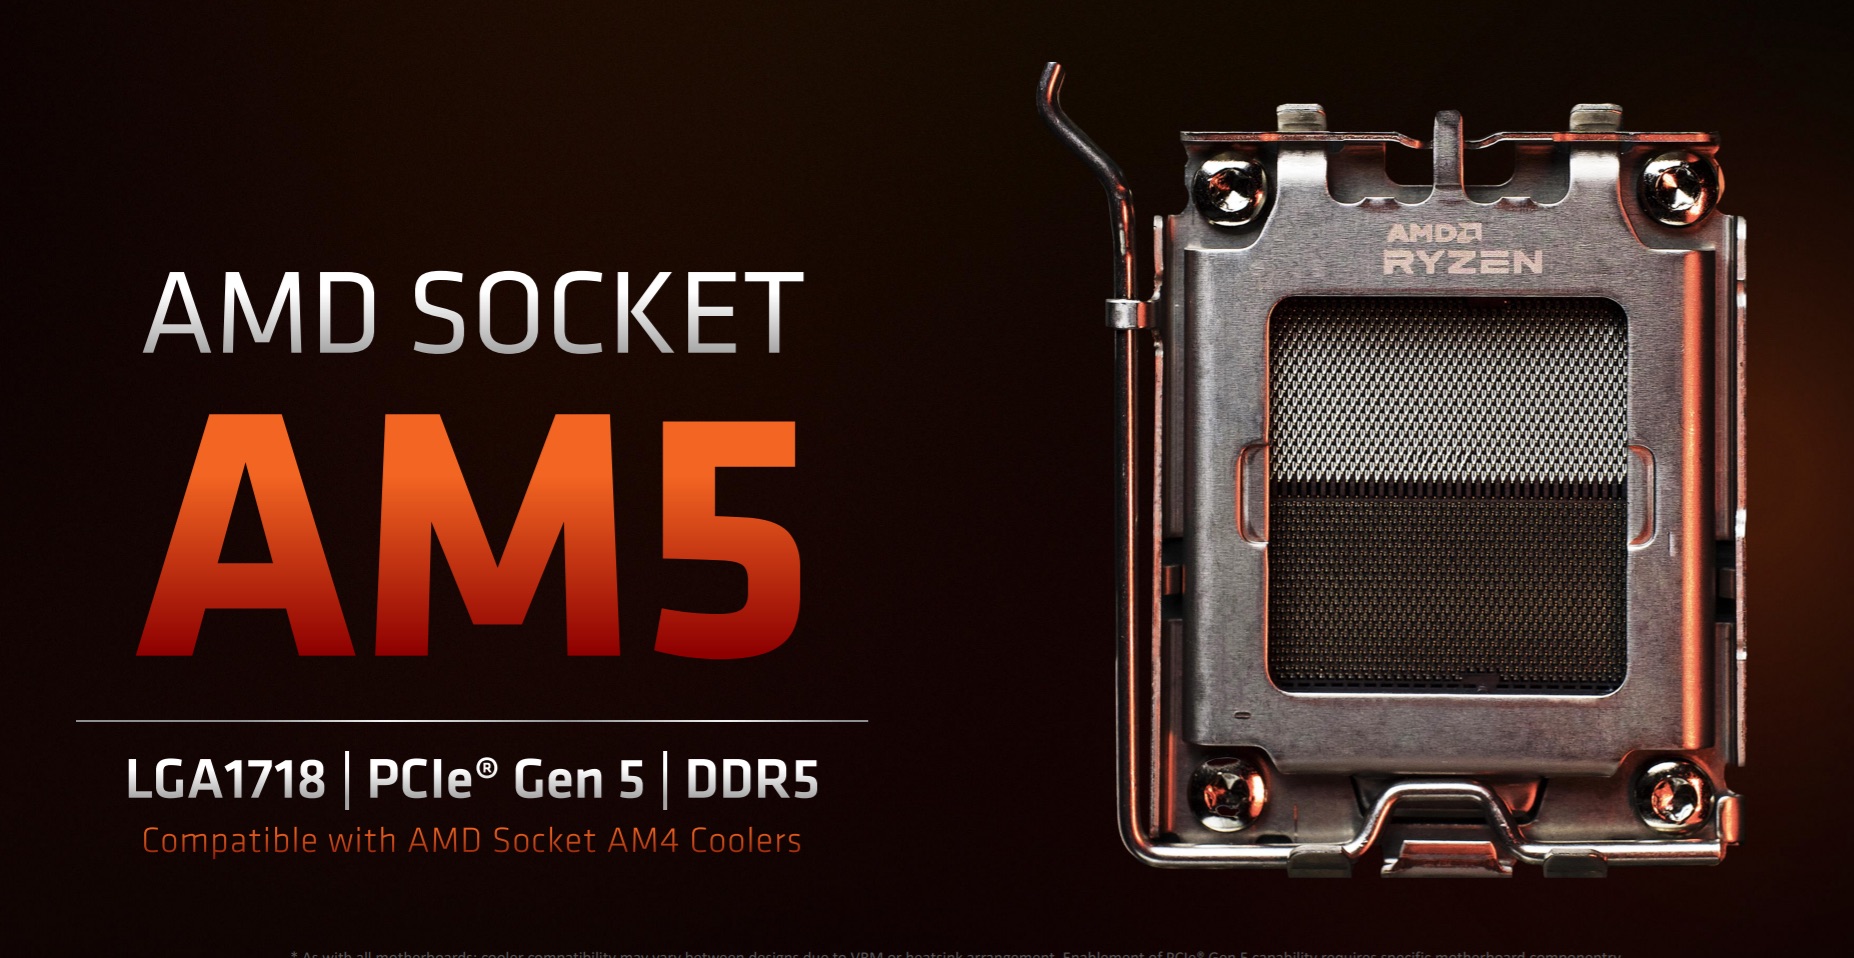 AMD’s AM5 Socket – What do we know?